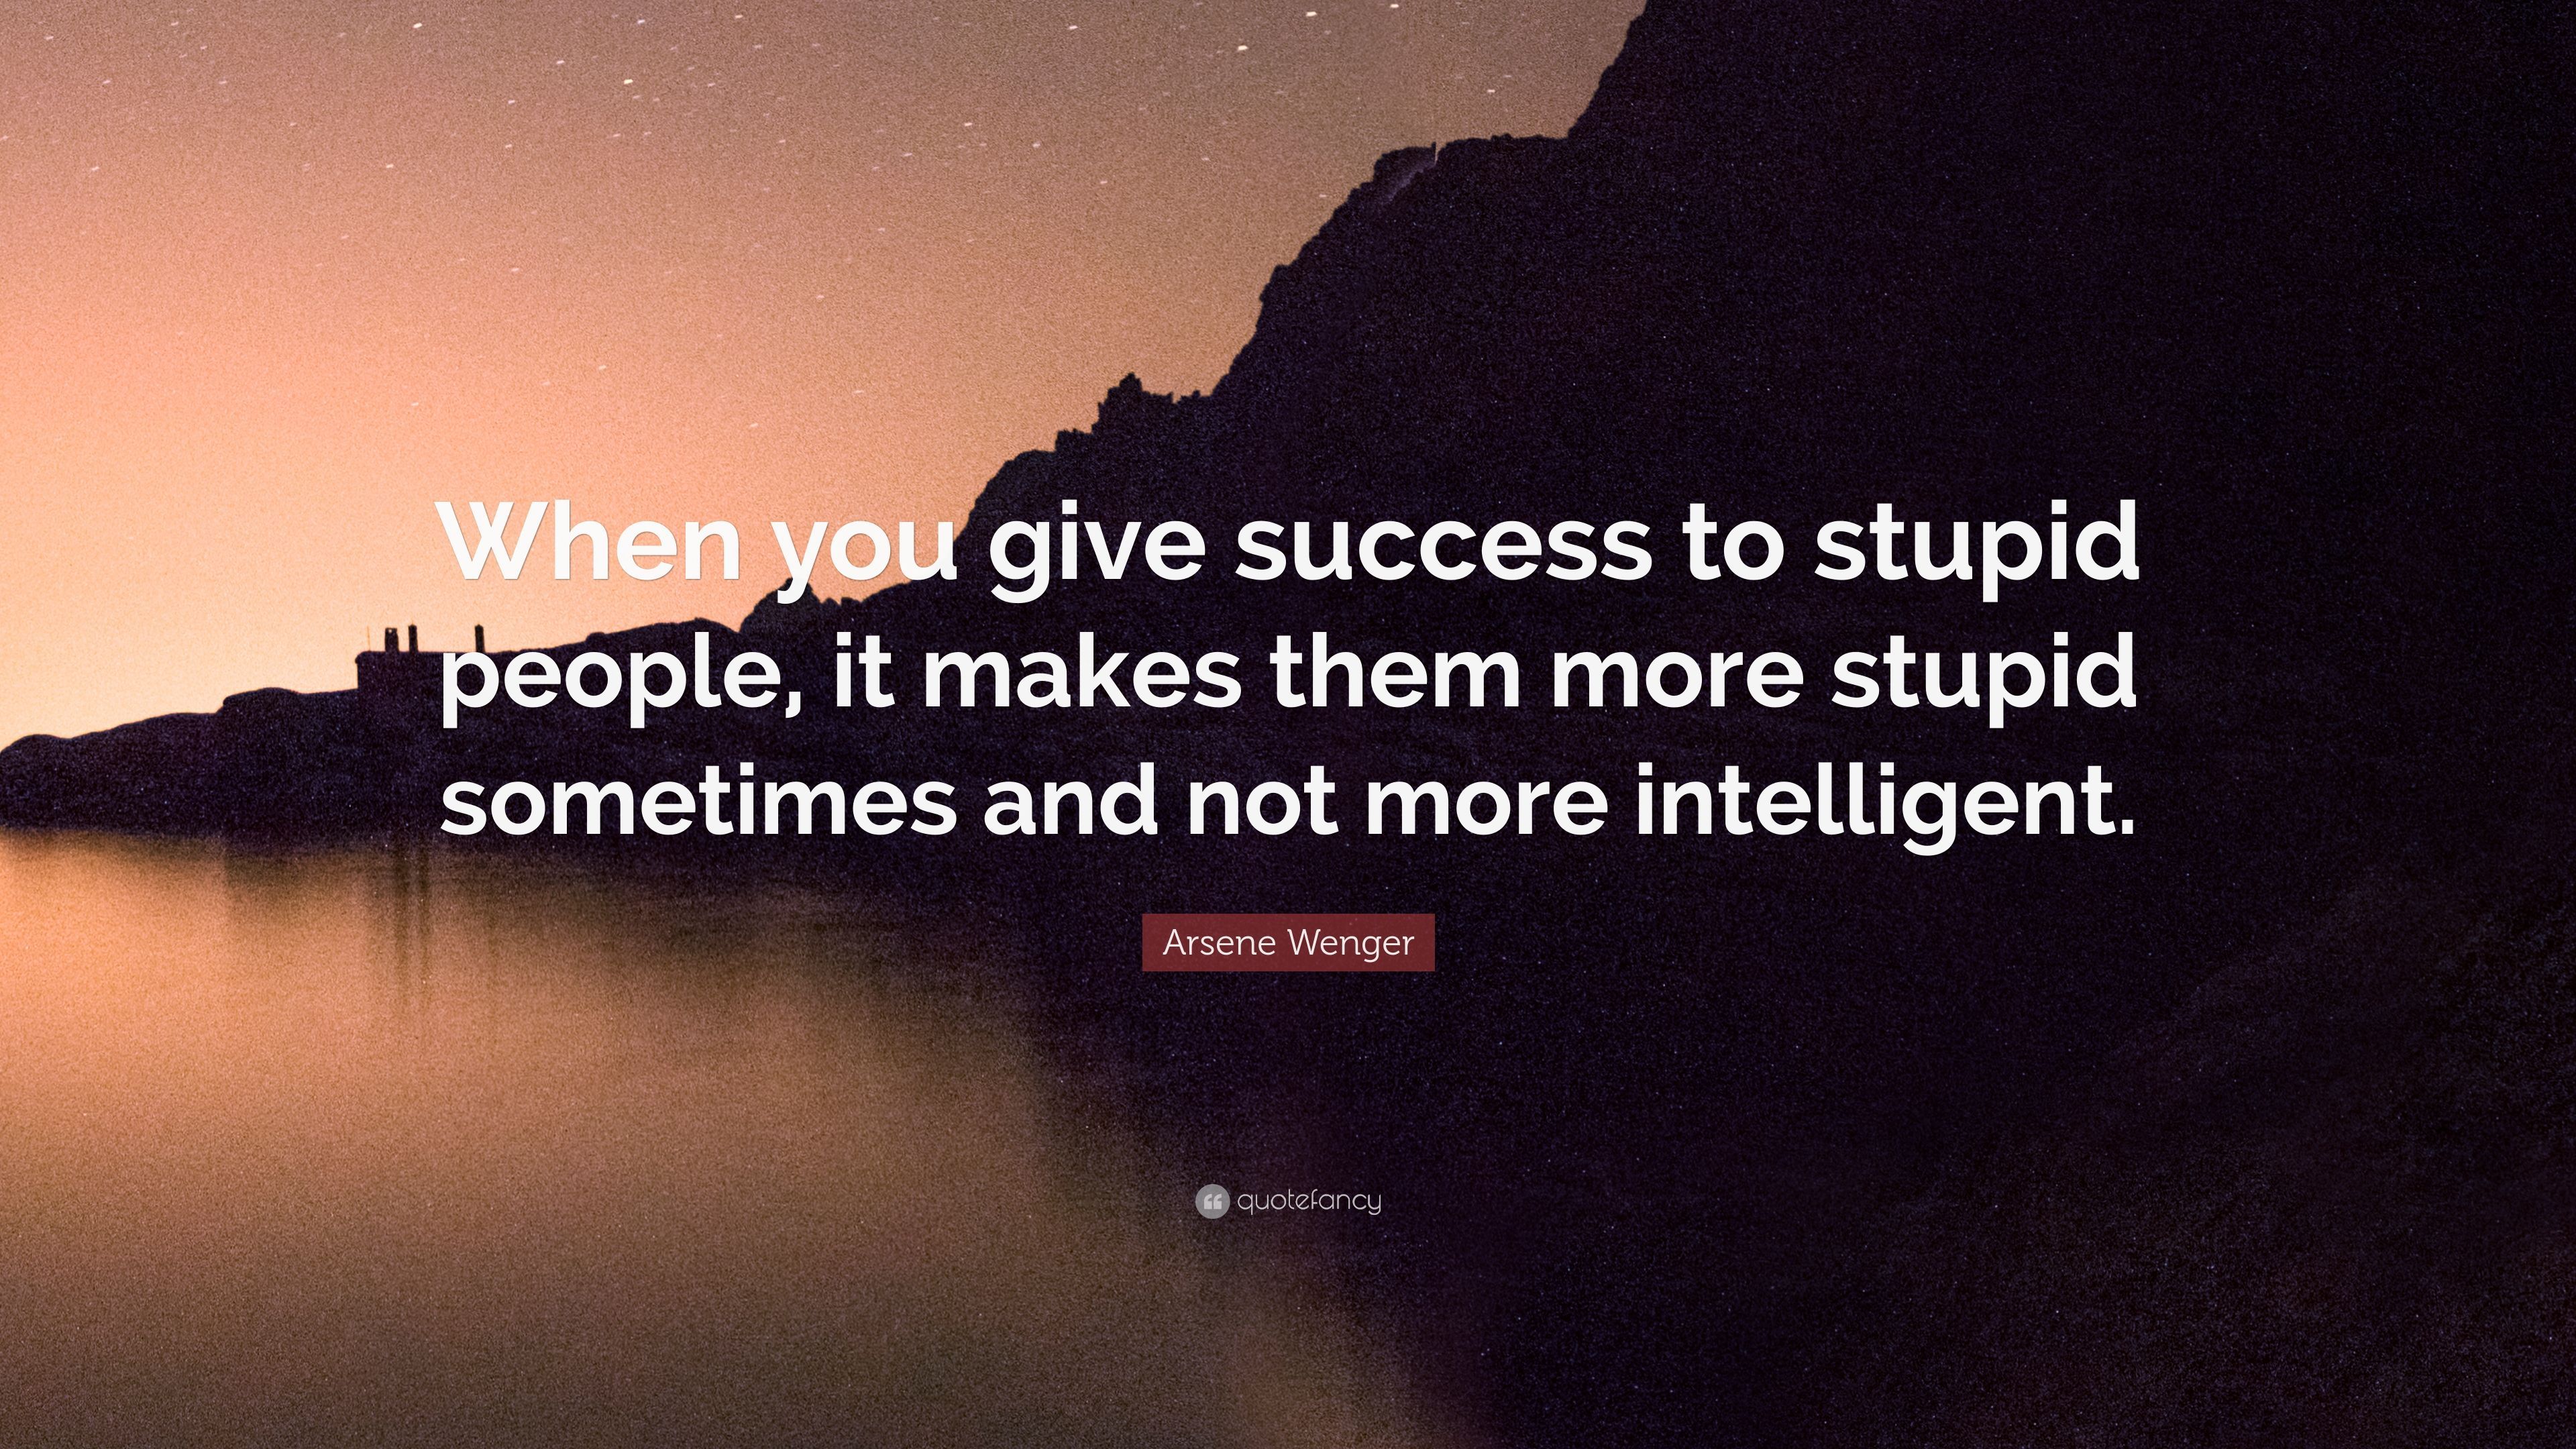 Arsene Wenger Quote: “When you give success to stupid people, it